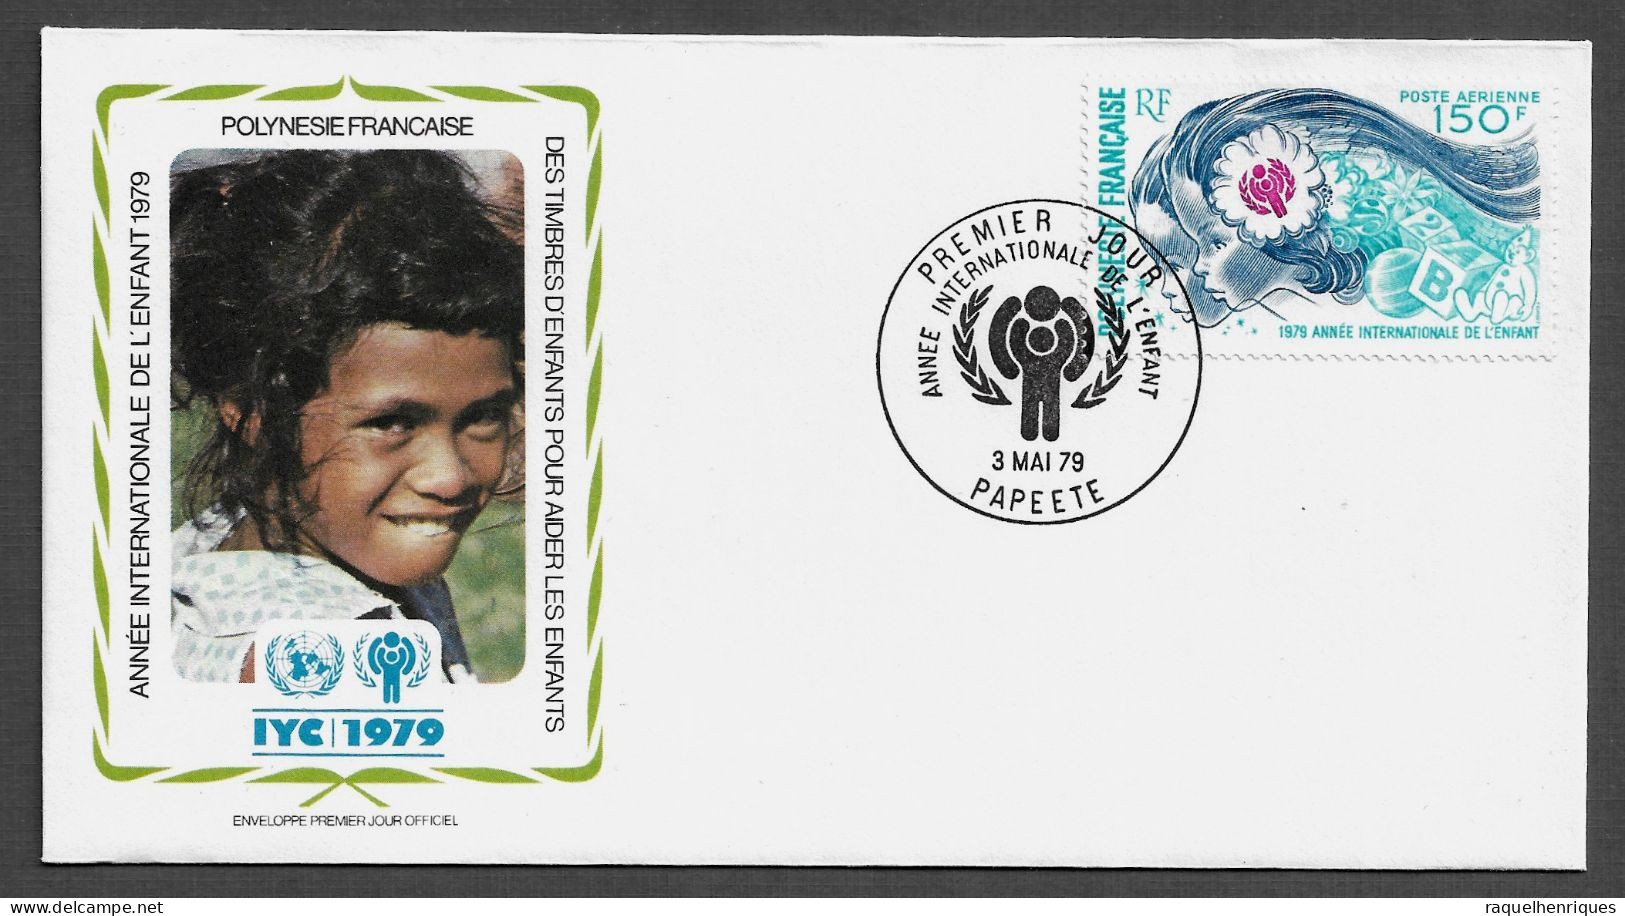 FRENCH POLYNESIA FDC COVER - 1979 International Year Of The Child SET FDC (FDC79#07) - Storia Postale